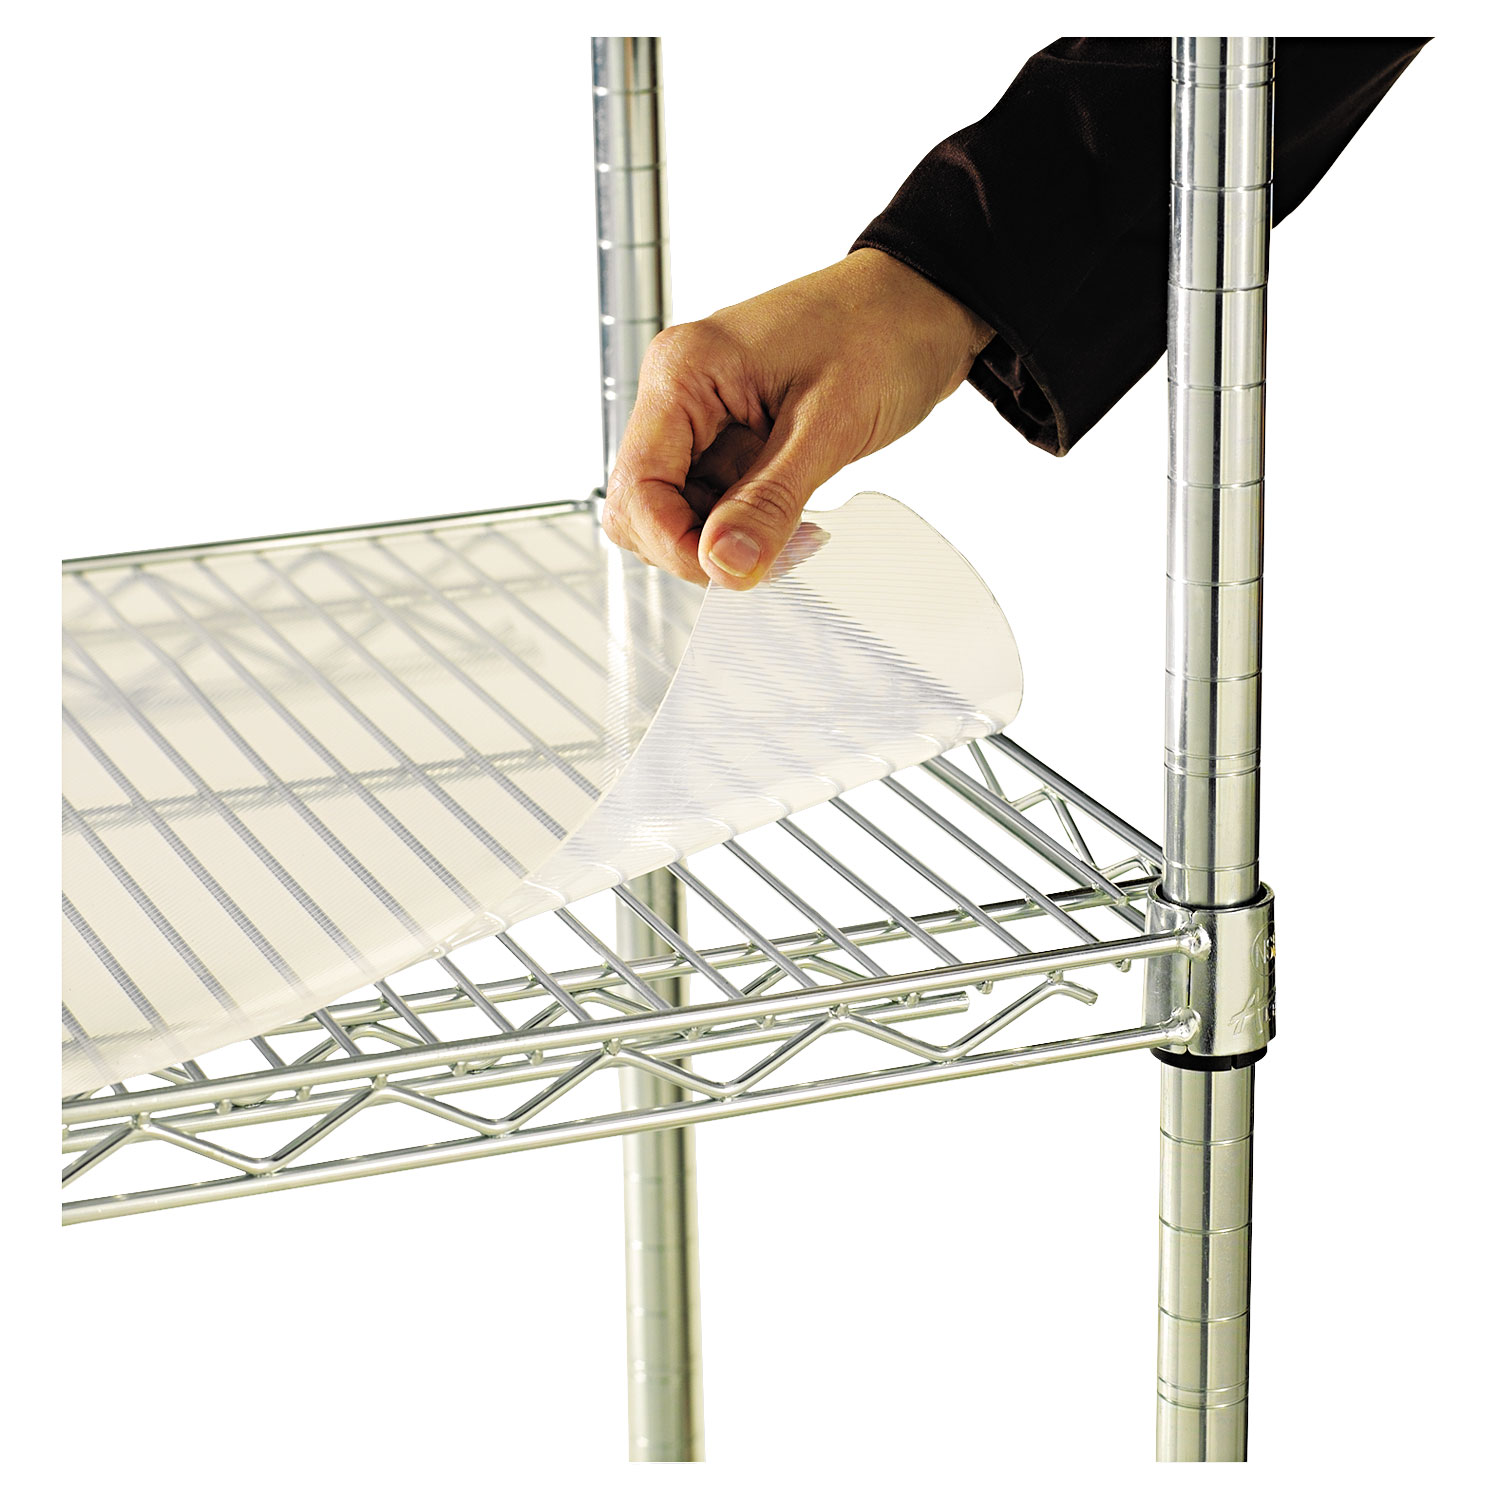  Alera ALESW59SL4818 Shelf Liners For Wire Shelving, Clear Plastic, 48w x 18d, 4/Pack (ALESW59SL4818) 